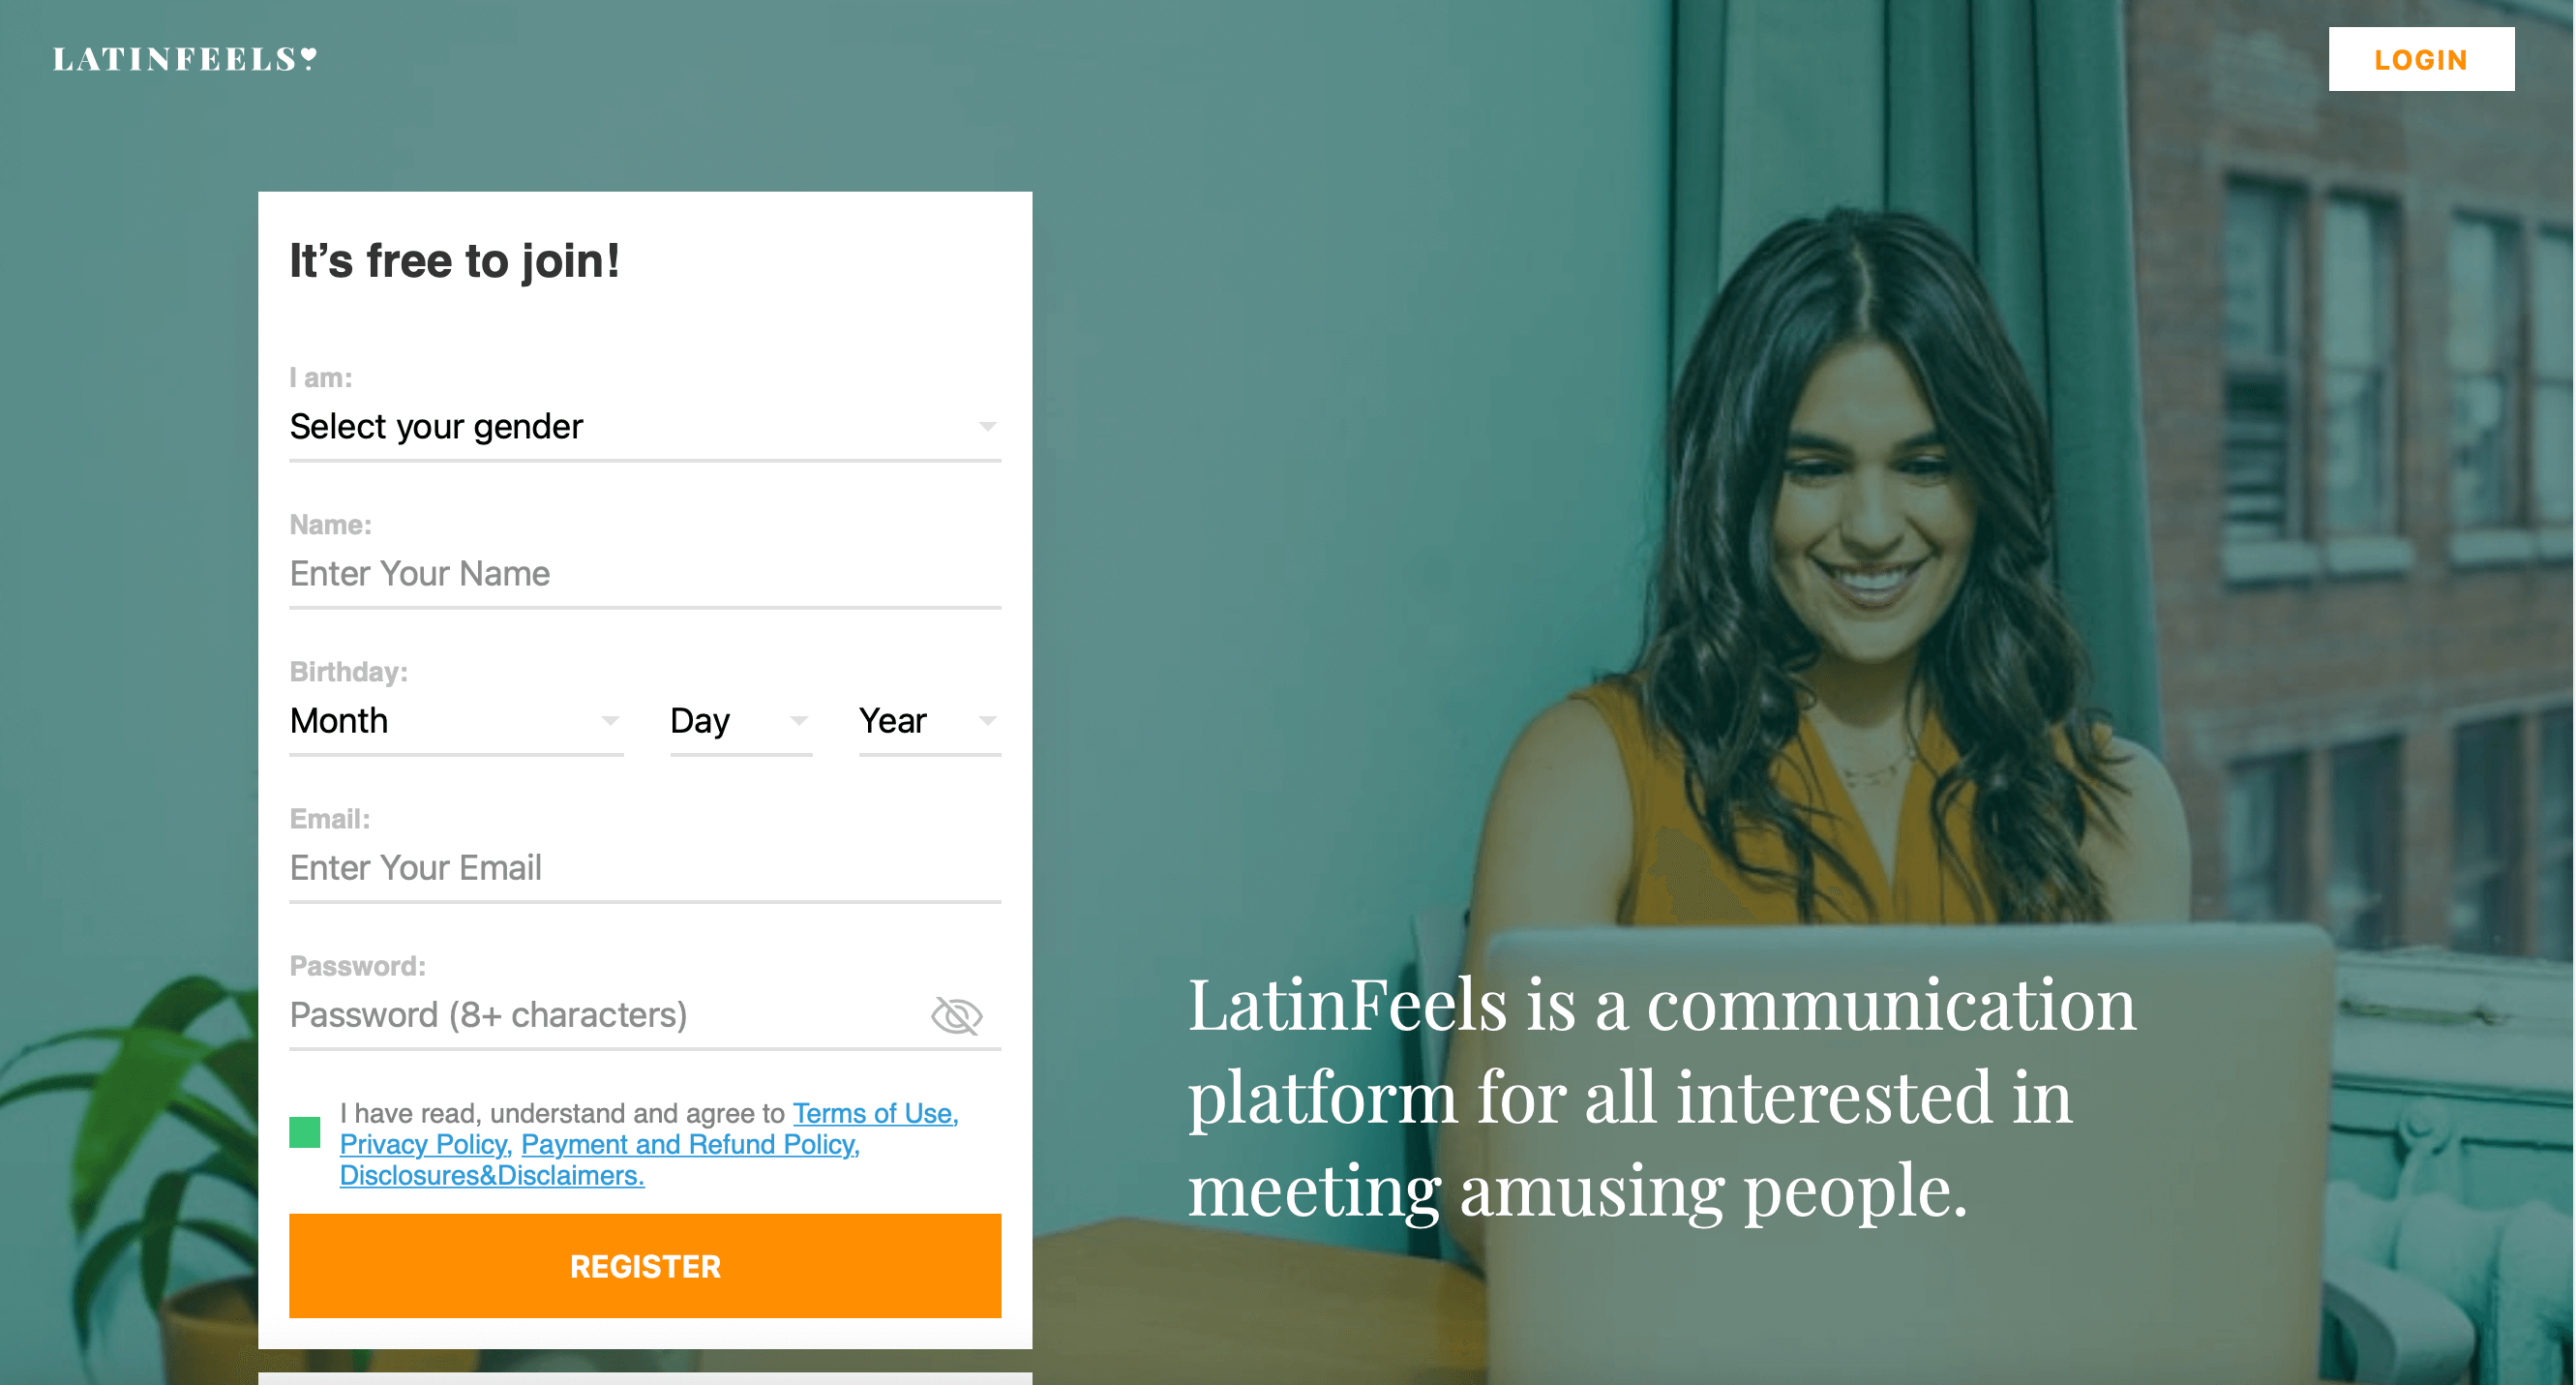 LatinFeels.com: as safe, legit, and trustworthy as expected